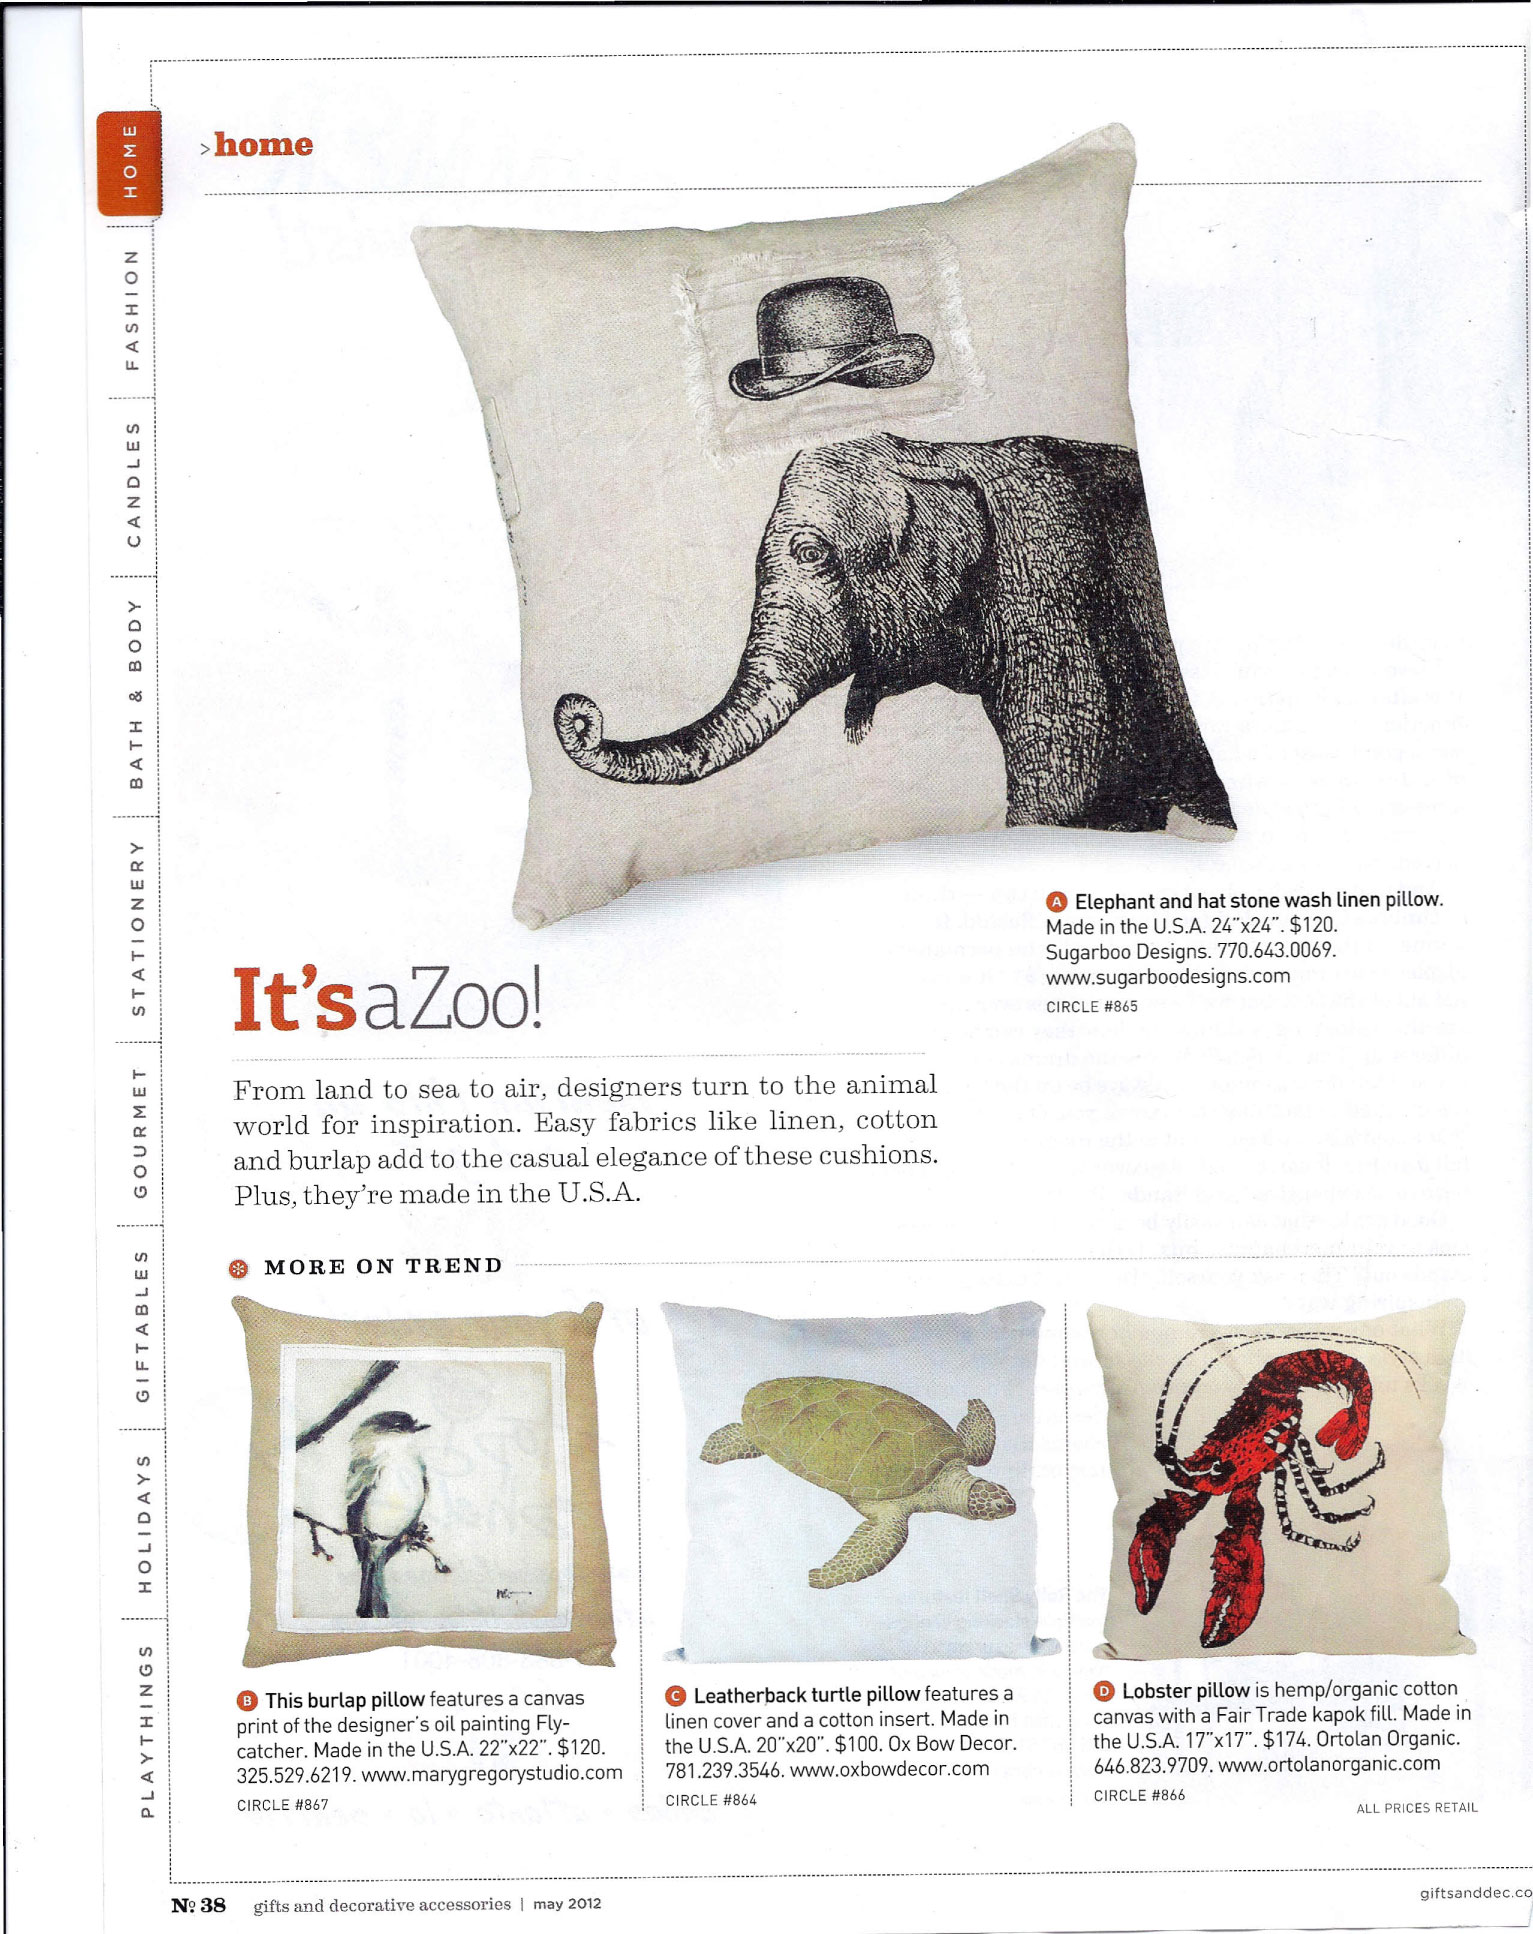 Gifts & Decorative Accessories - May 2012